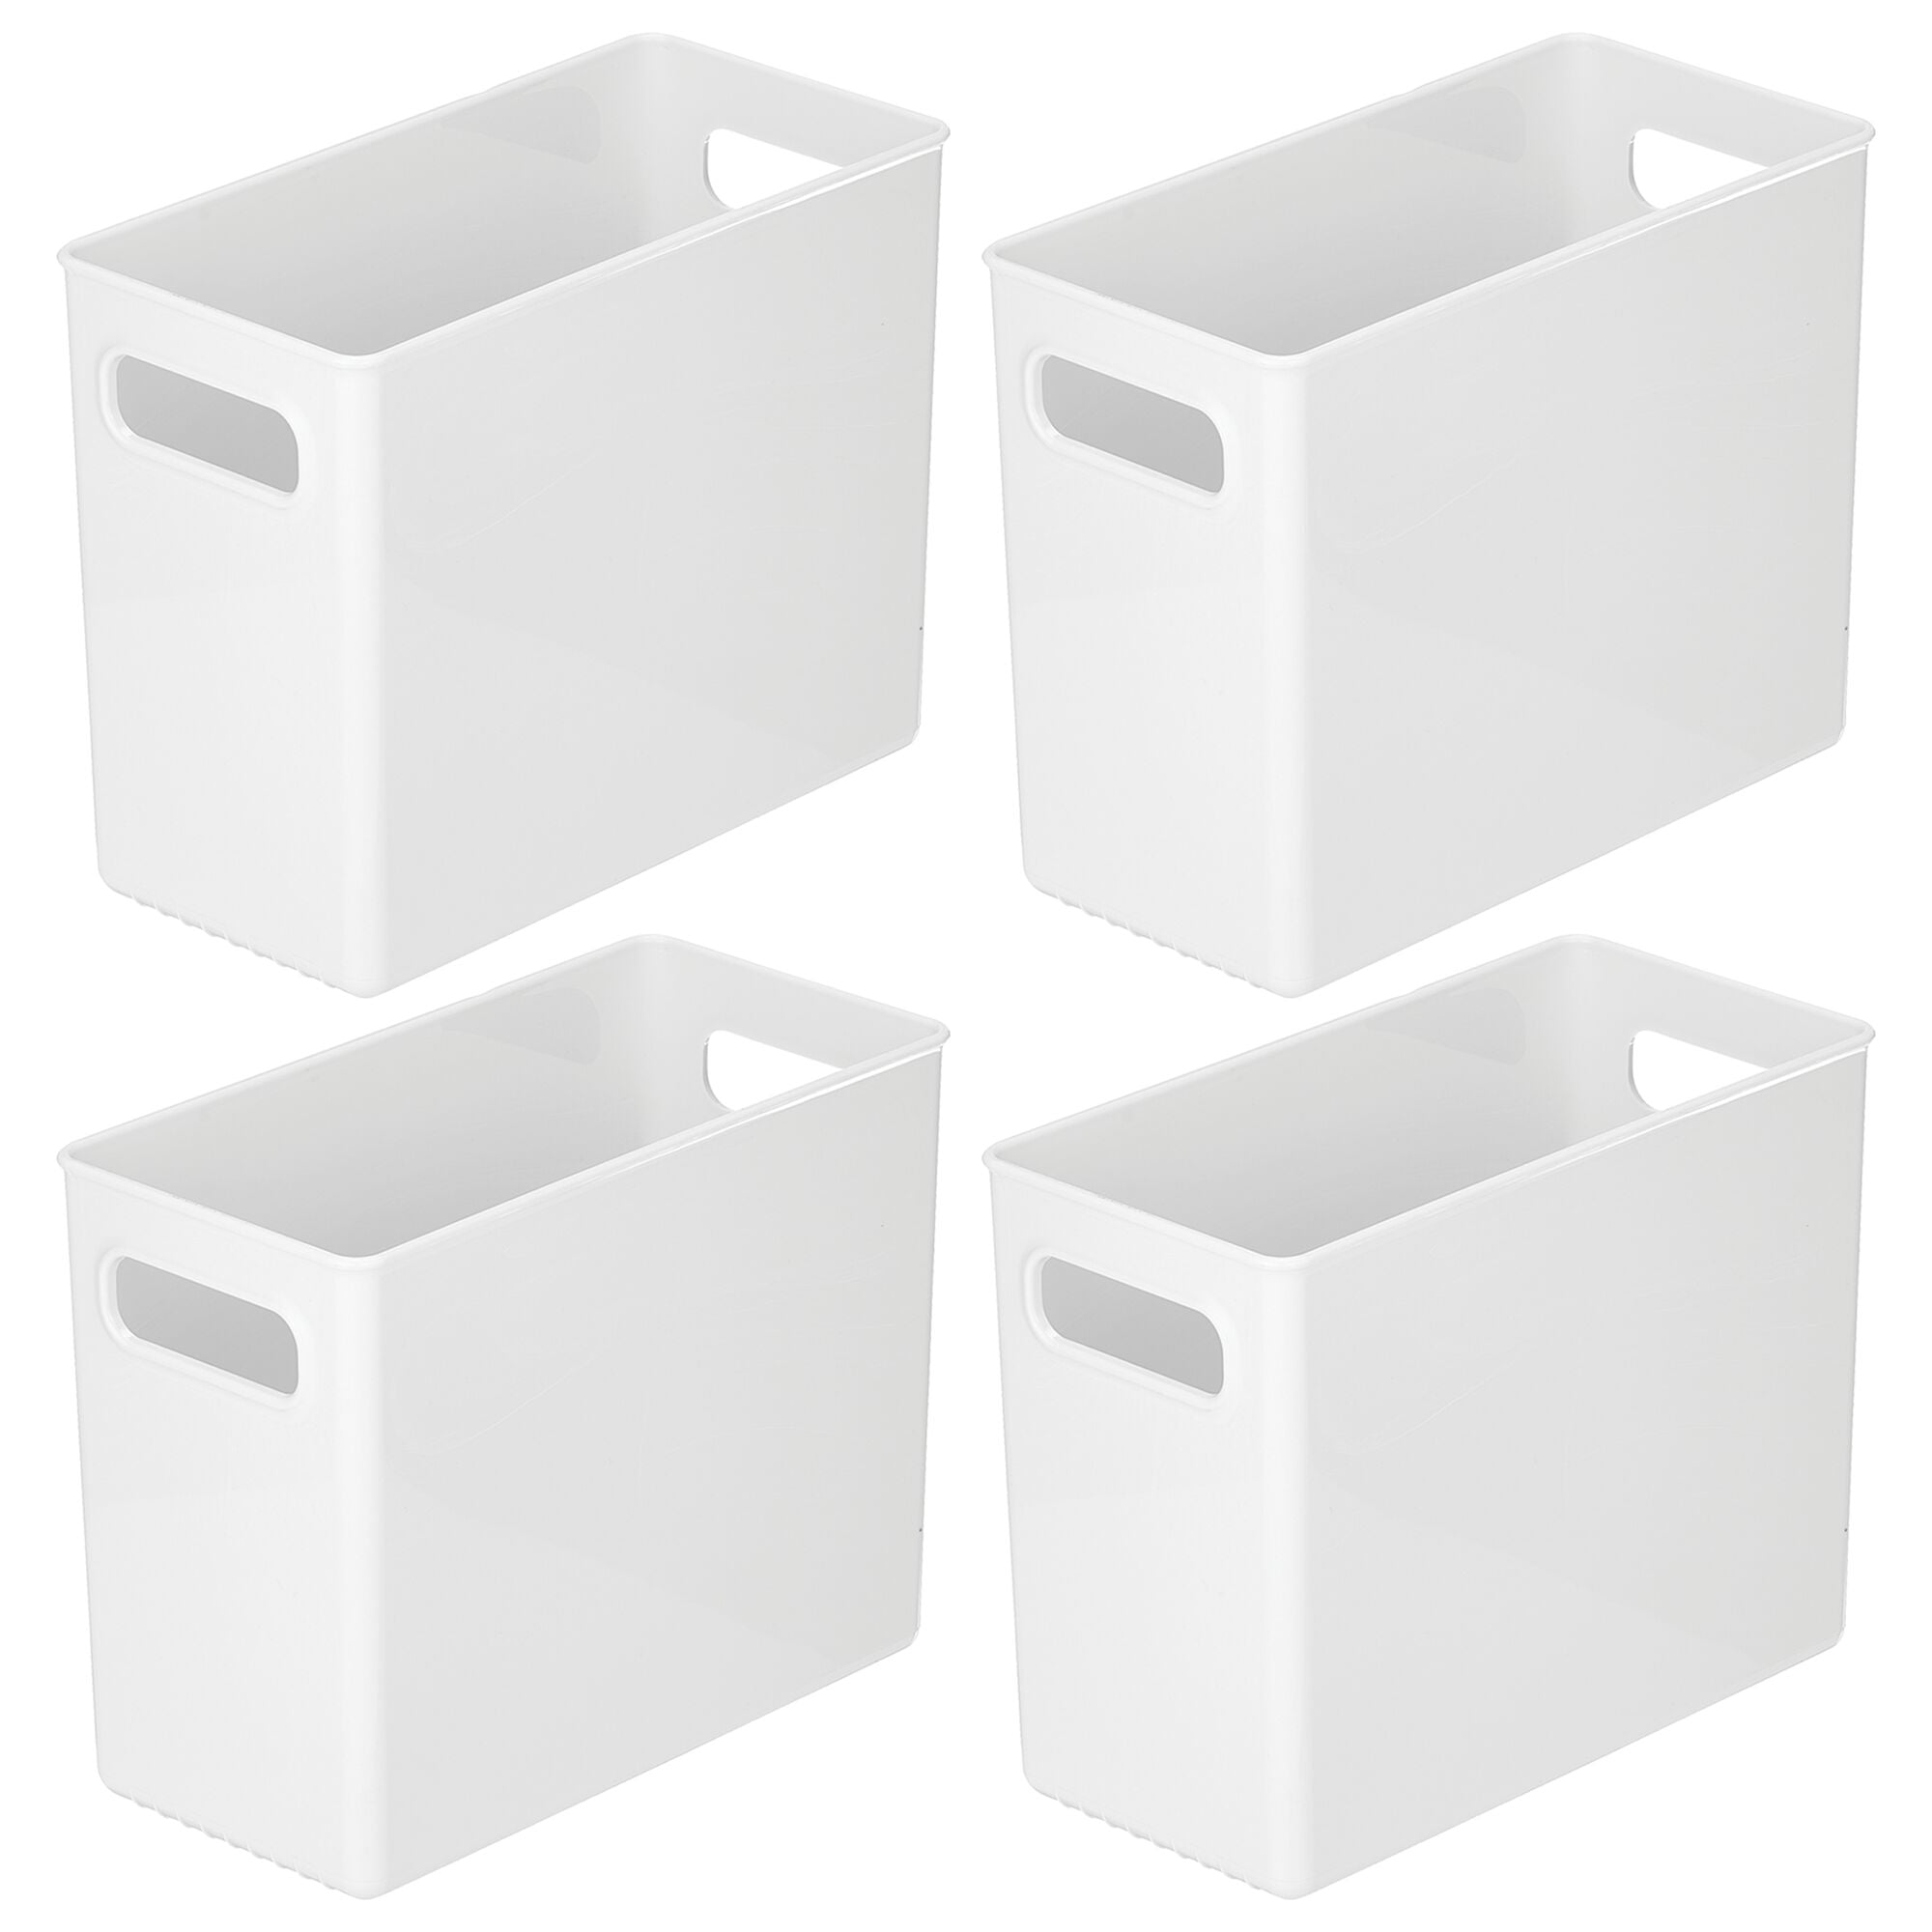  mDesign Deep Plastic Office Storage Bins with Handles for  Organization in Filing Cabinet, Closet, or Desk Drawers, Organizer for  Notes, Pens, Pencils, and Staples - Ligne Collection - 4 Pack 